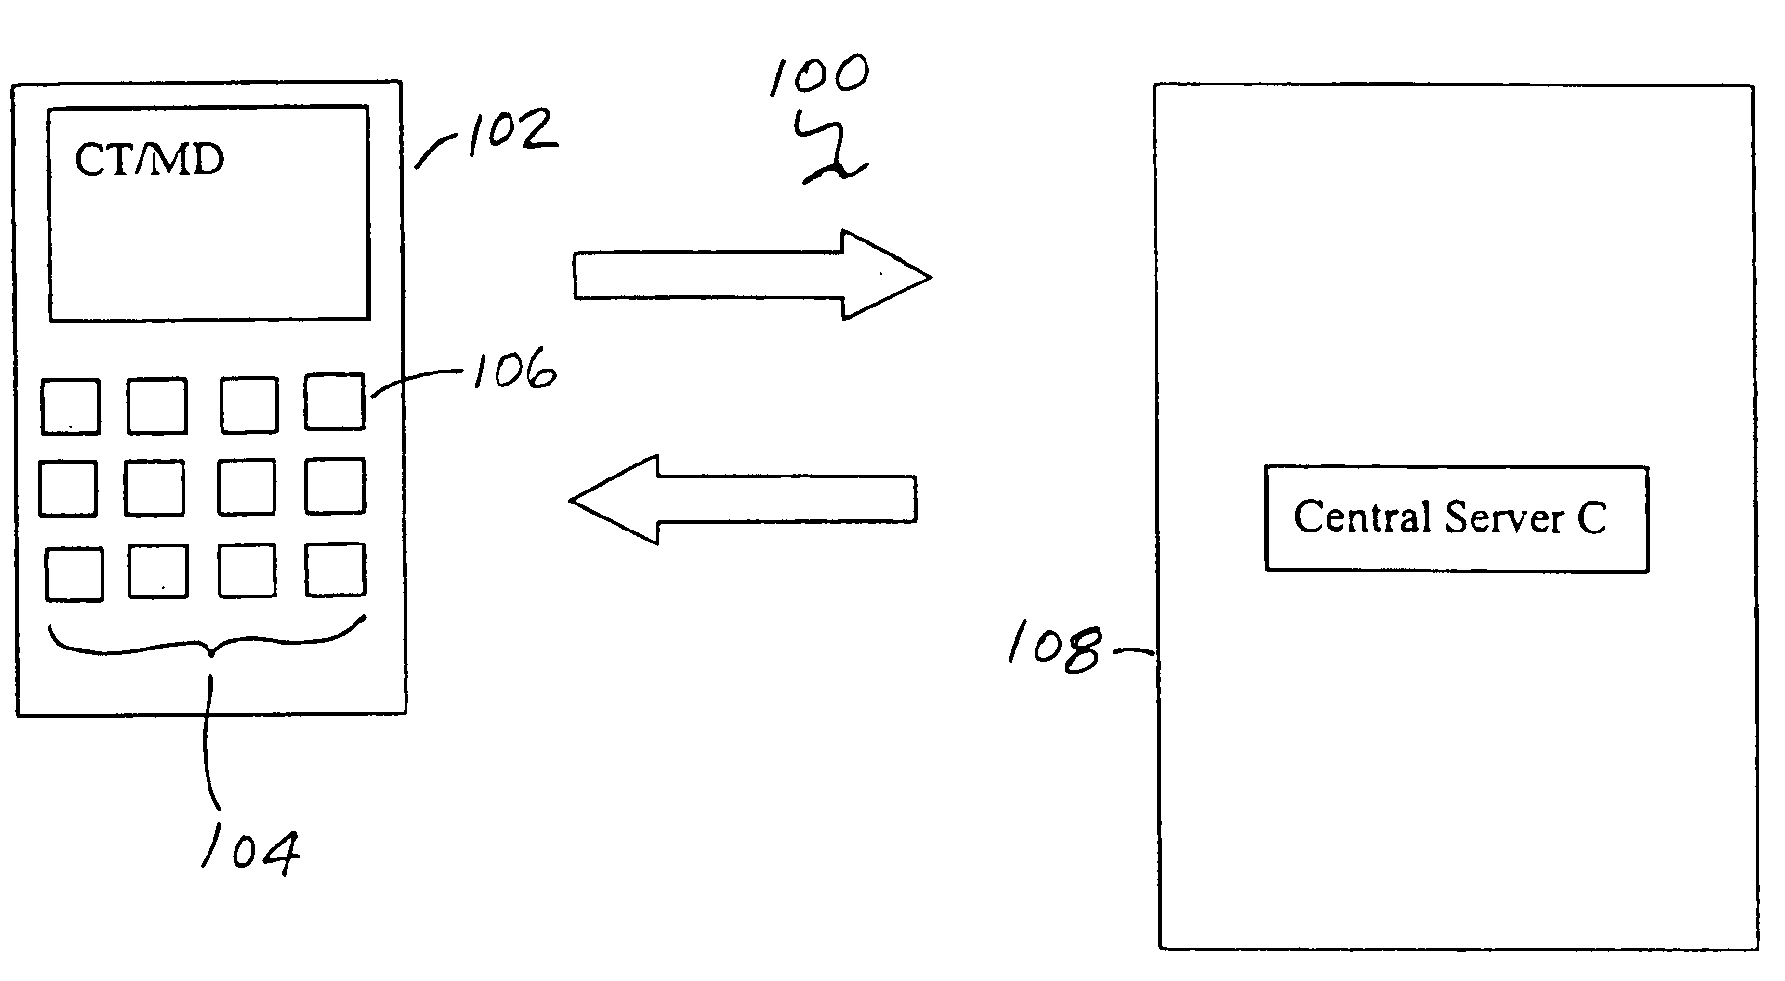 Secure and custom configurable key, pen or voice based input/output scheme for mobile devices using a local or central server